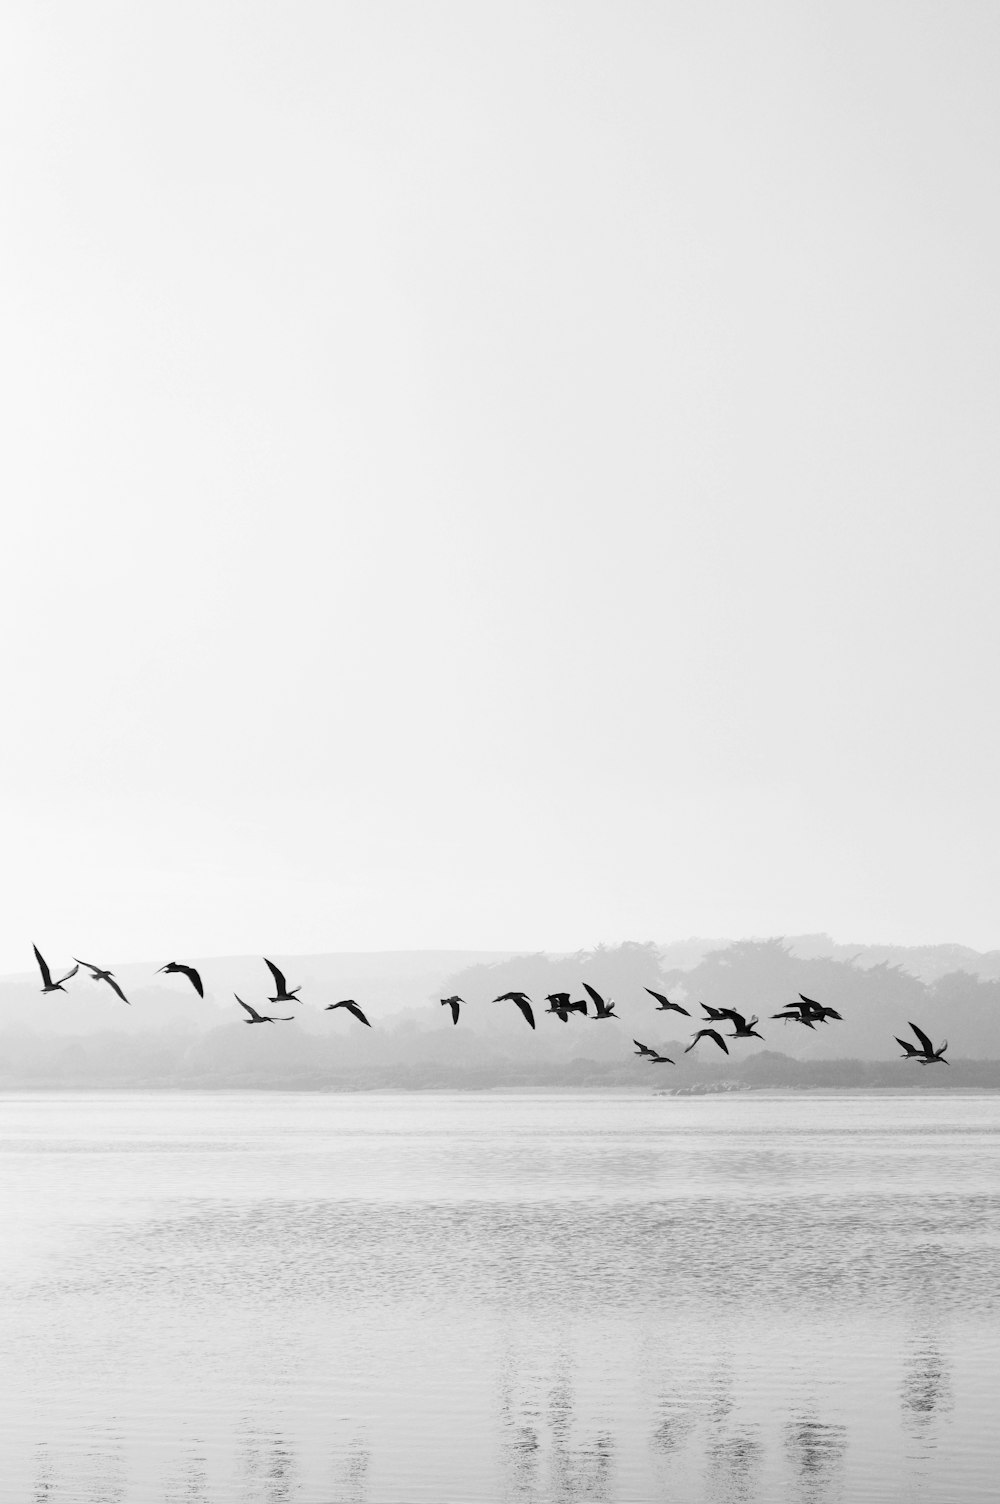 a flock of birds flying over a large body of water